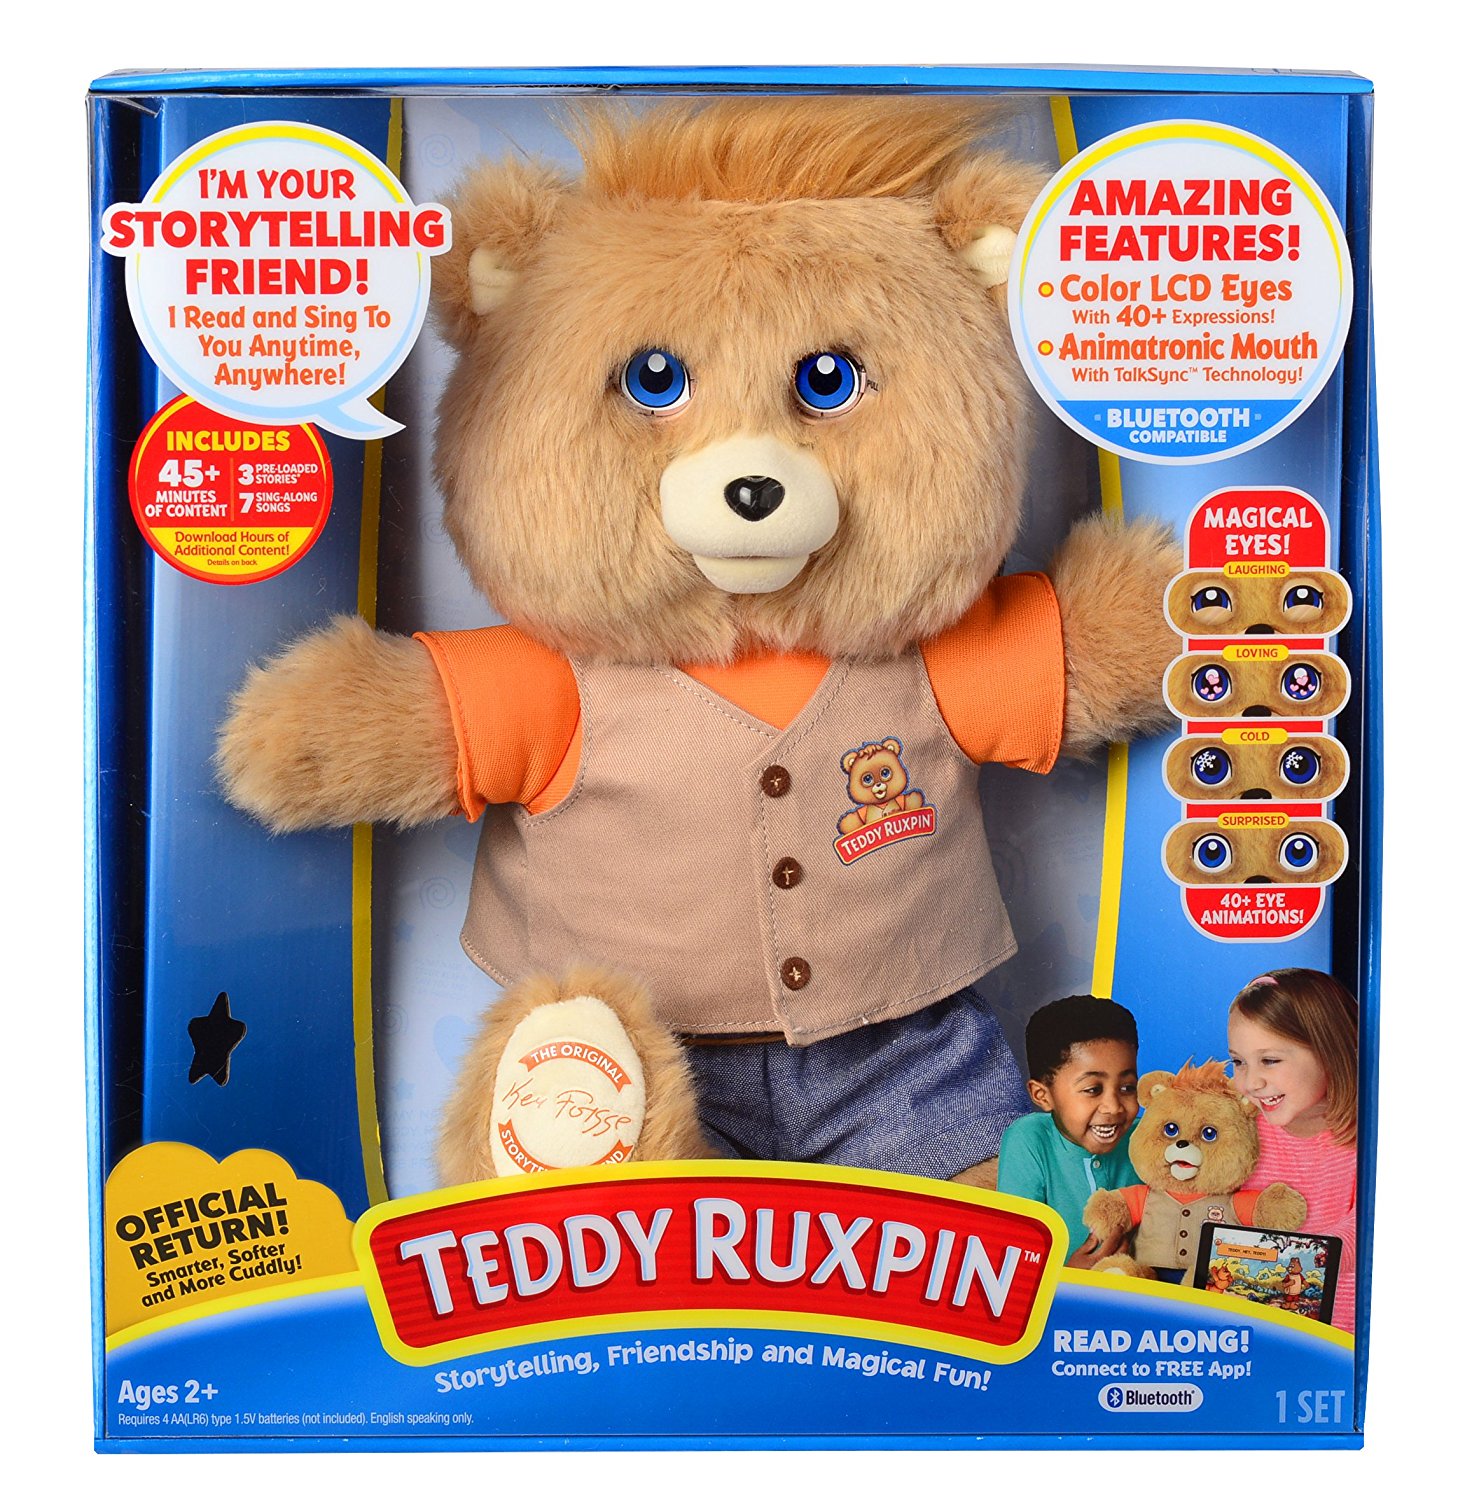 Teddy Ruxpin - Official Return of the Storytime and Magical Bear